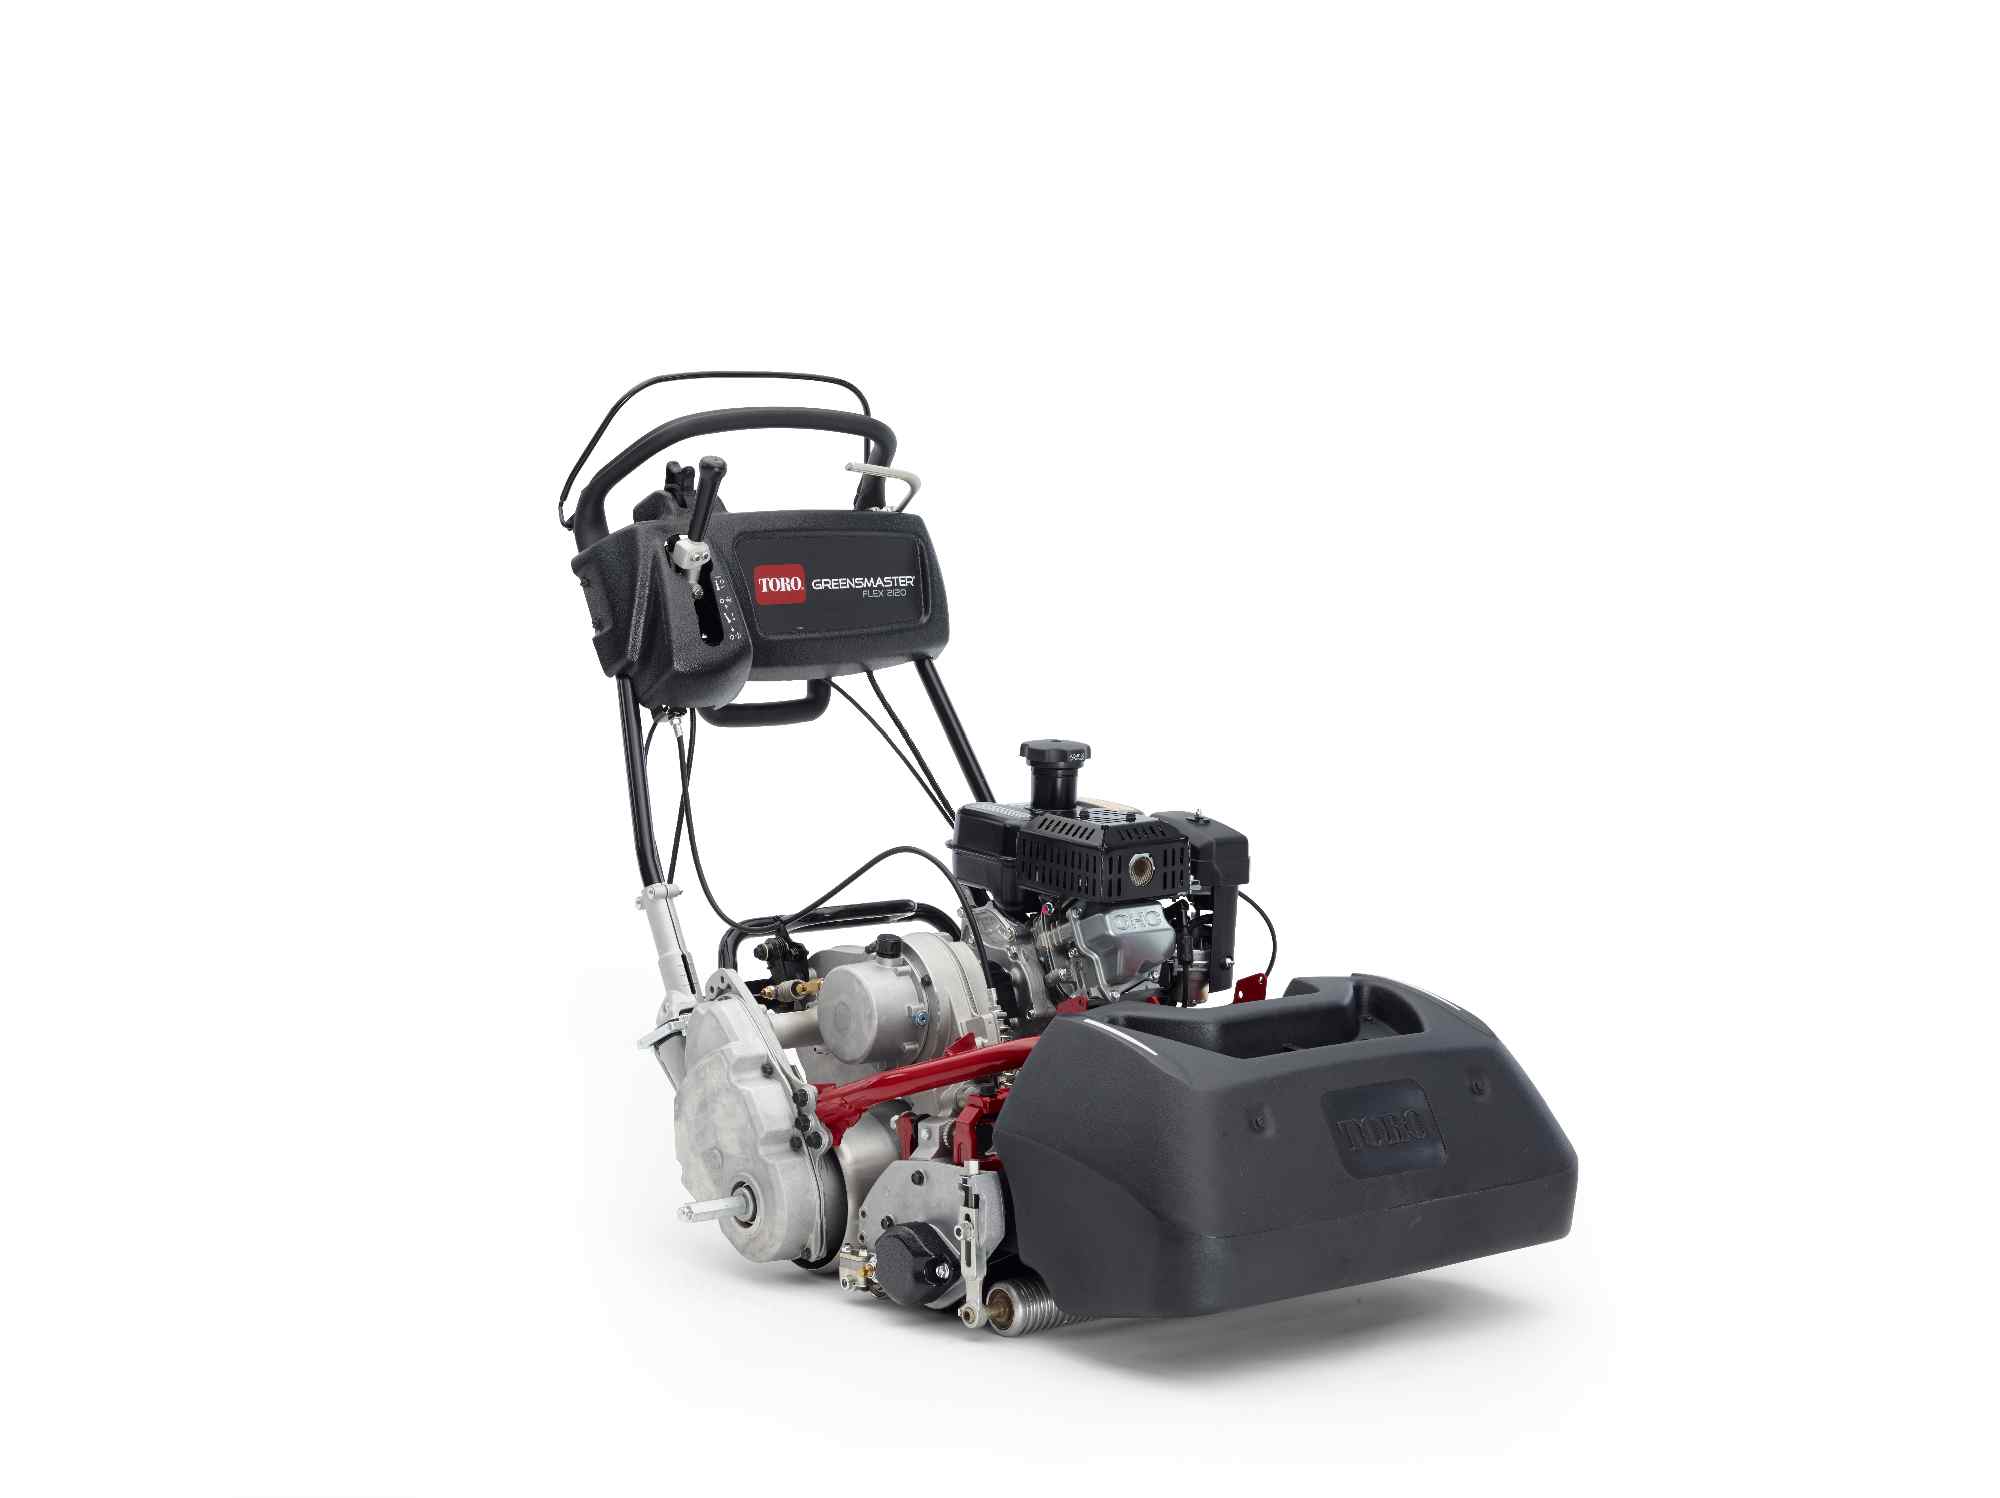 The new Toro® Greensmaster Flex™ 2120 provides a precise cut and easy operation